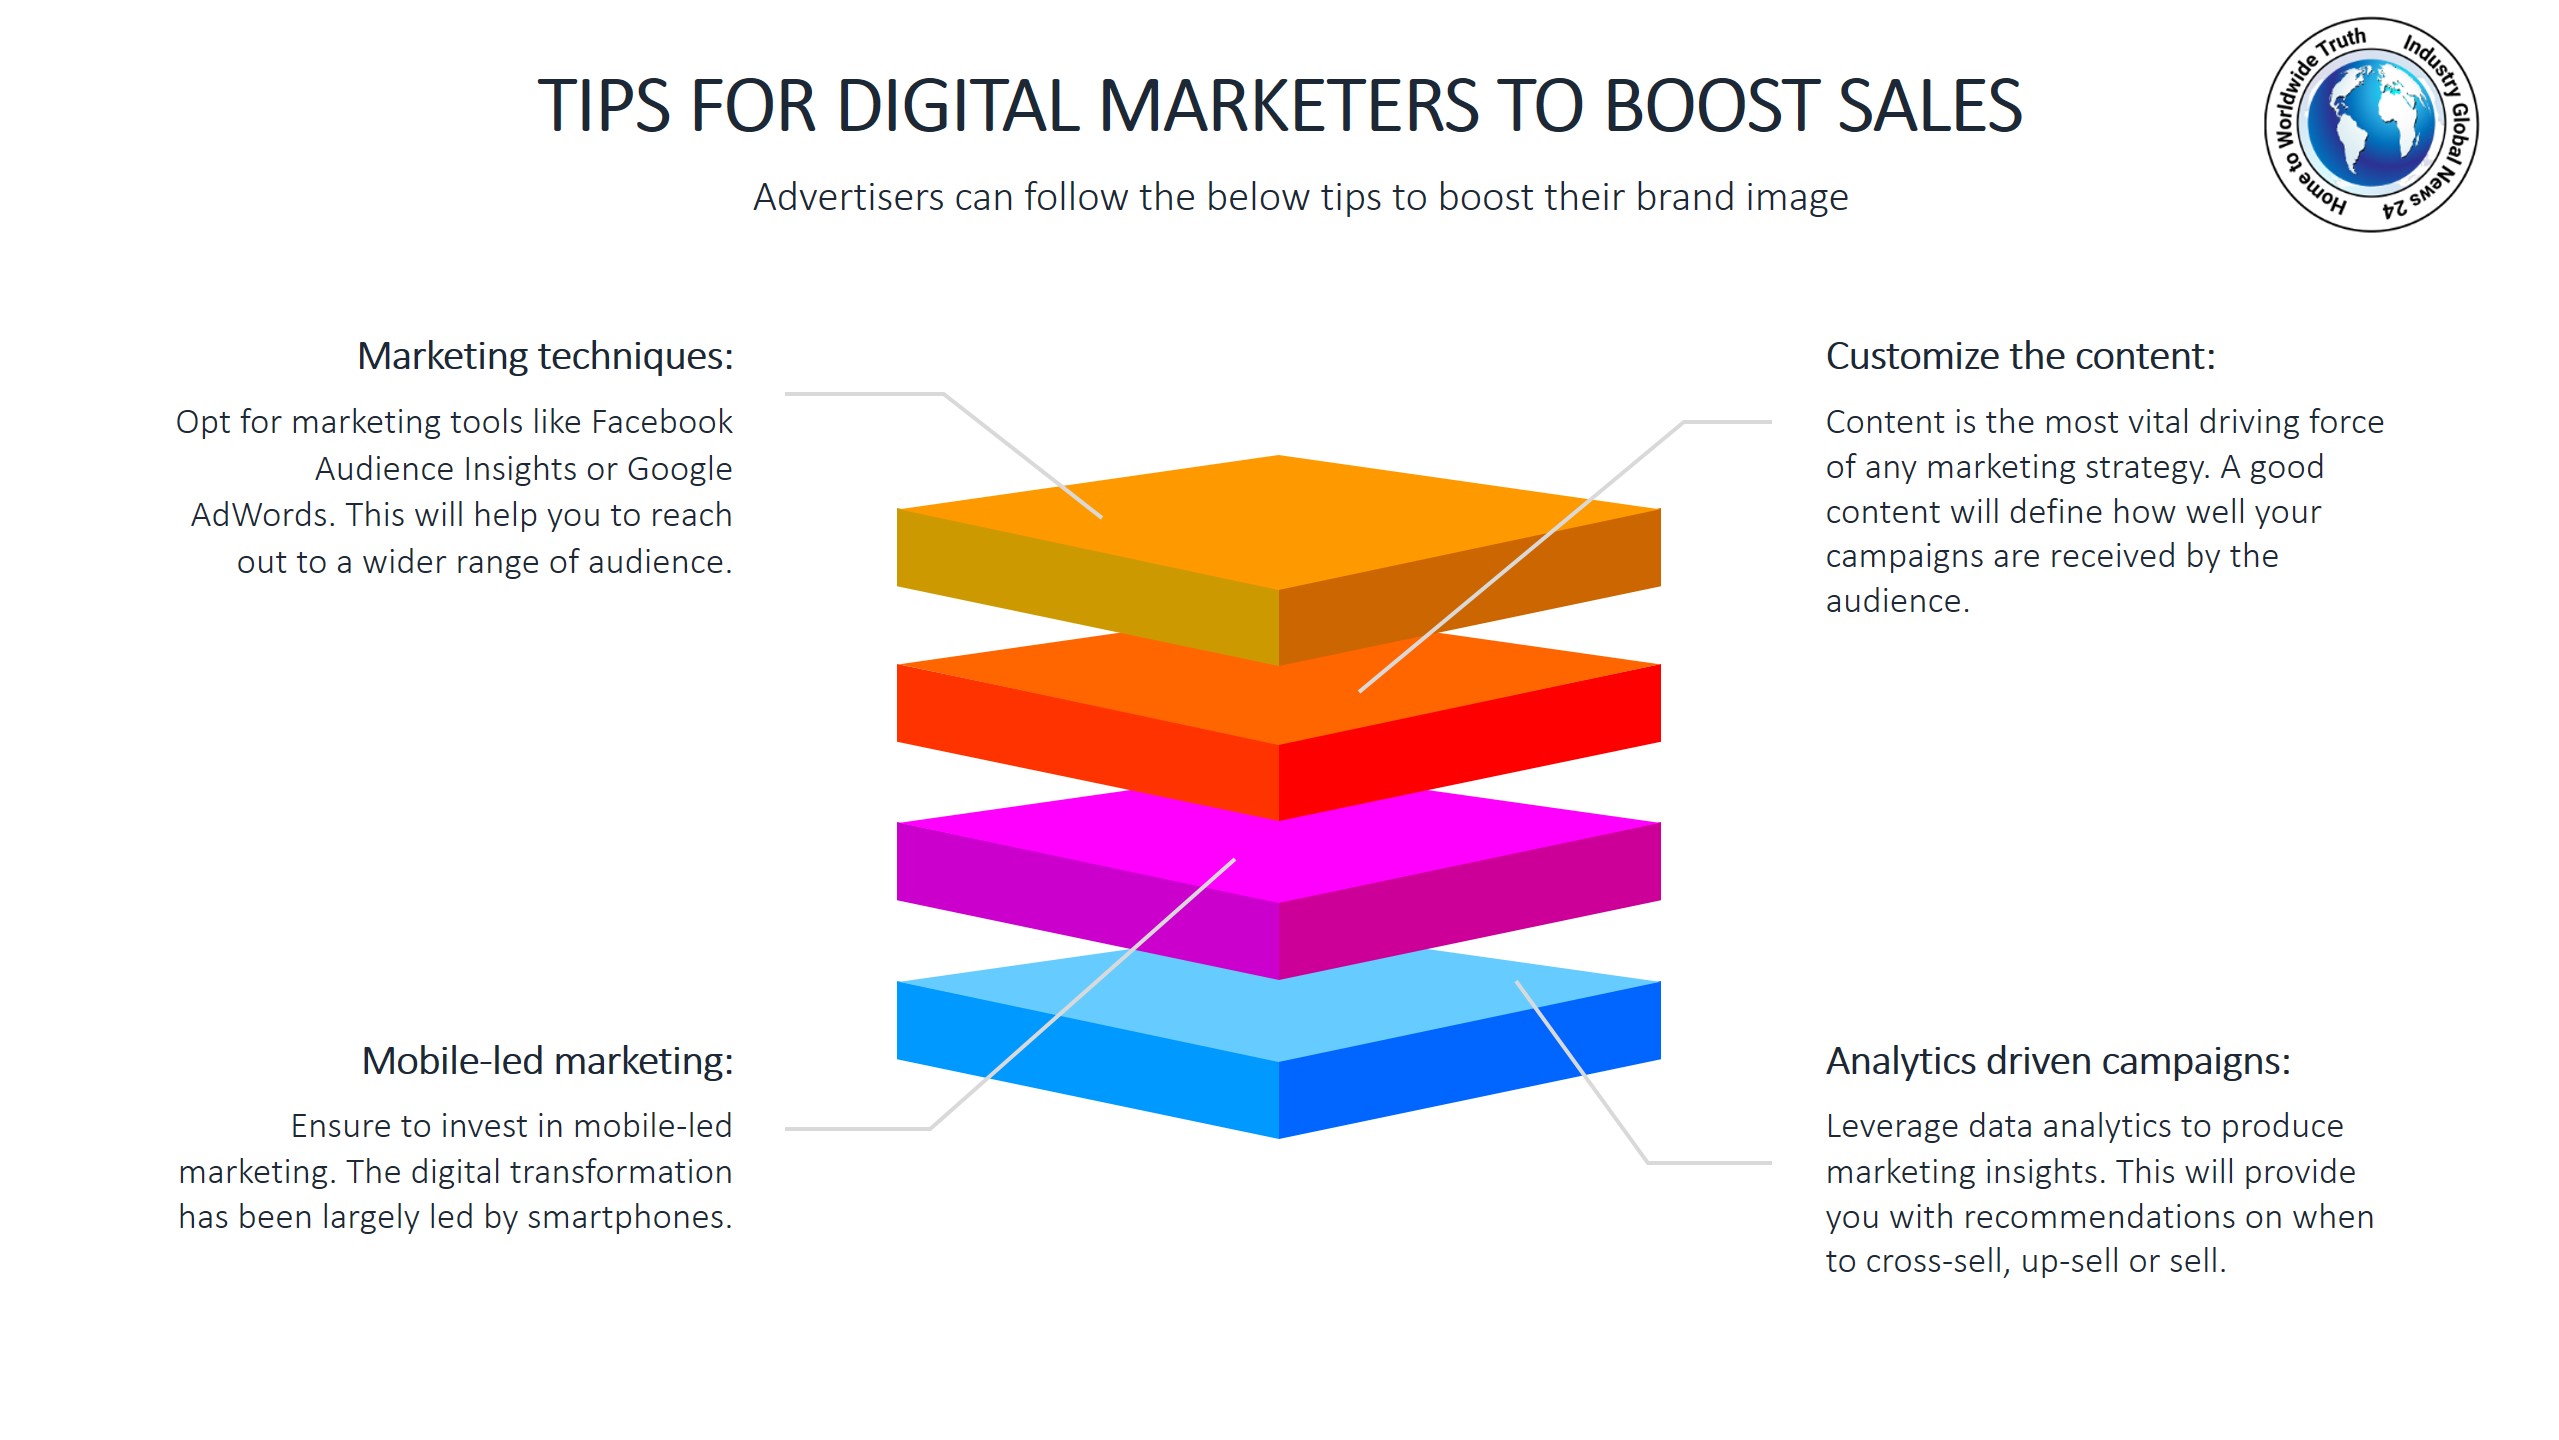 Tips for digital marketers to boost sales